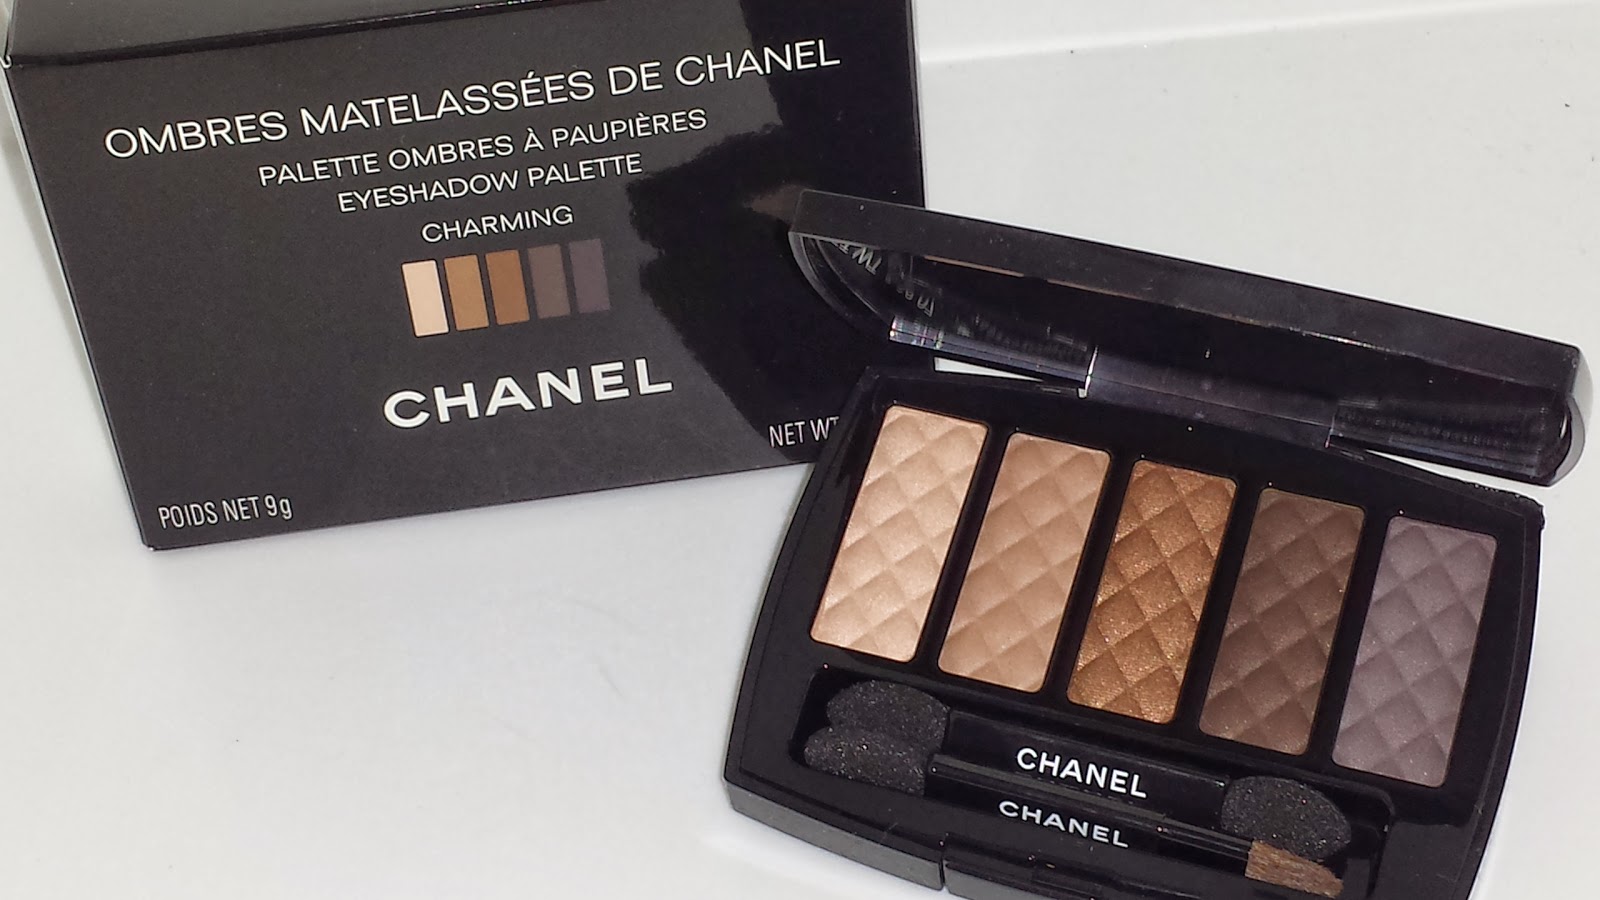 Chanel “Infinite Night” Holiday 2013 make-up collection